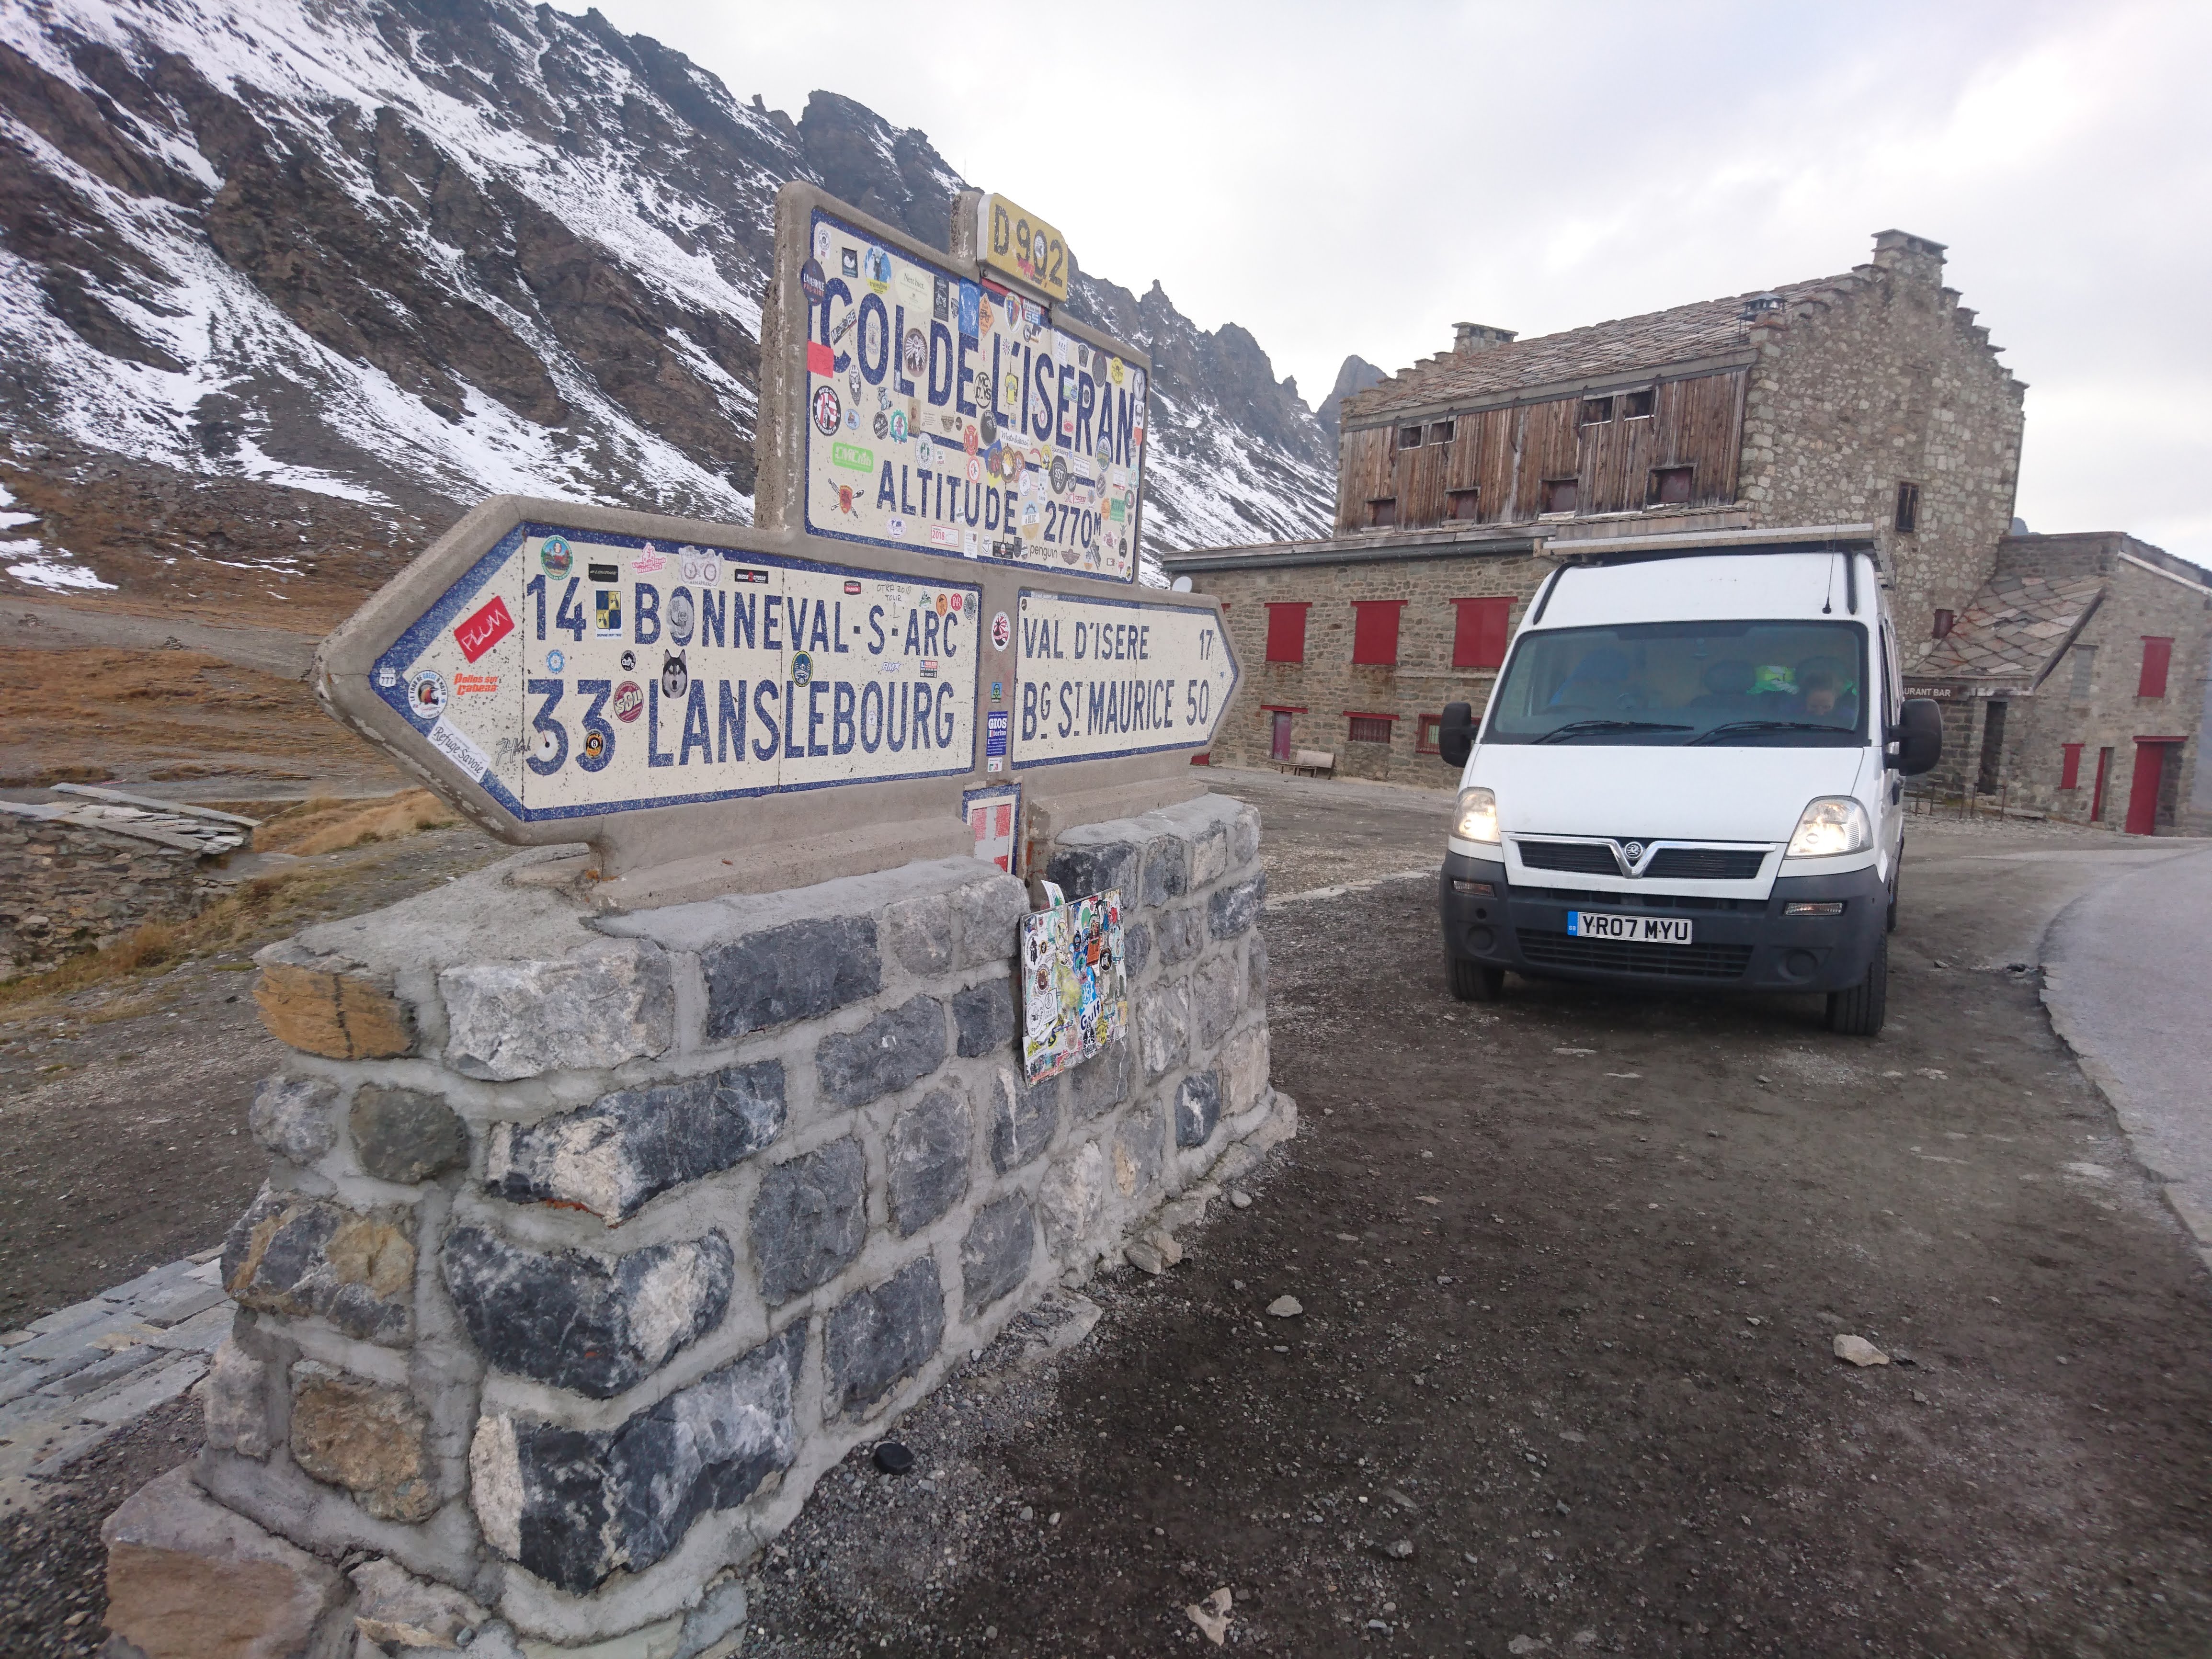 MewMew Campervan parked near the sign at Col de l'Iseran (el. 2,764 metres (9,068 ft)) is a mountain pass in France, the highest paved pass in the Alps. 